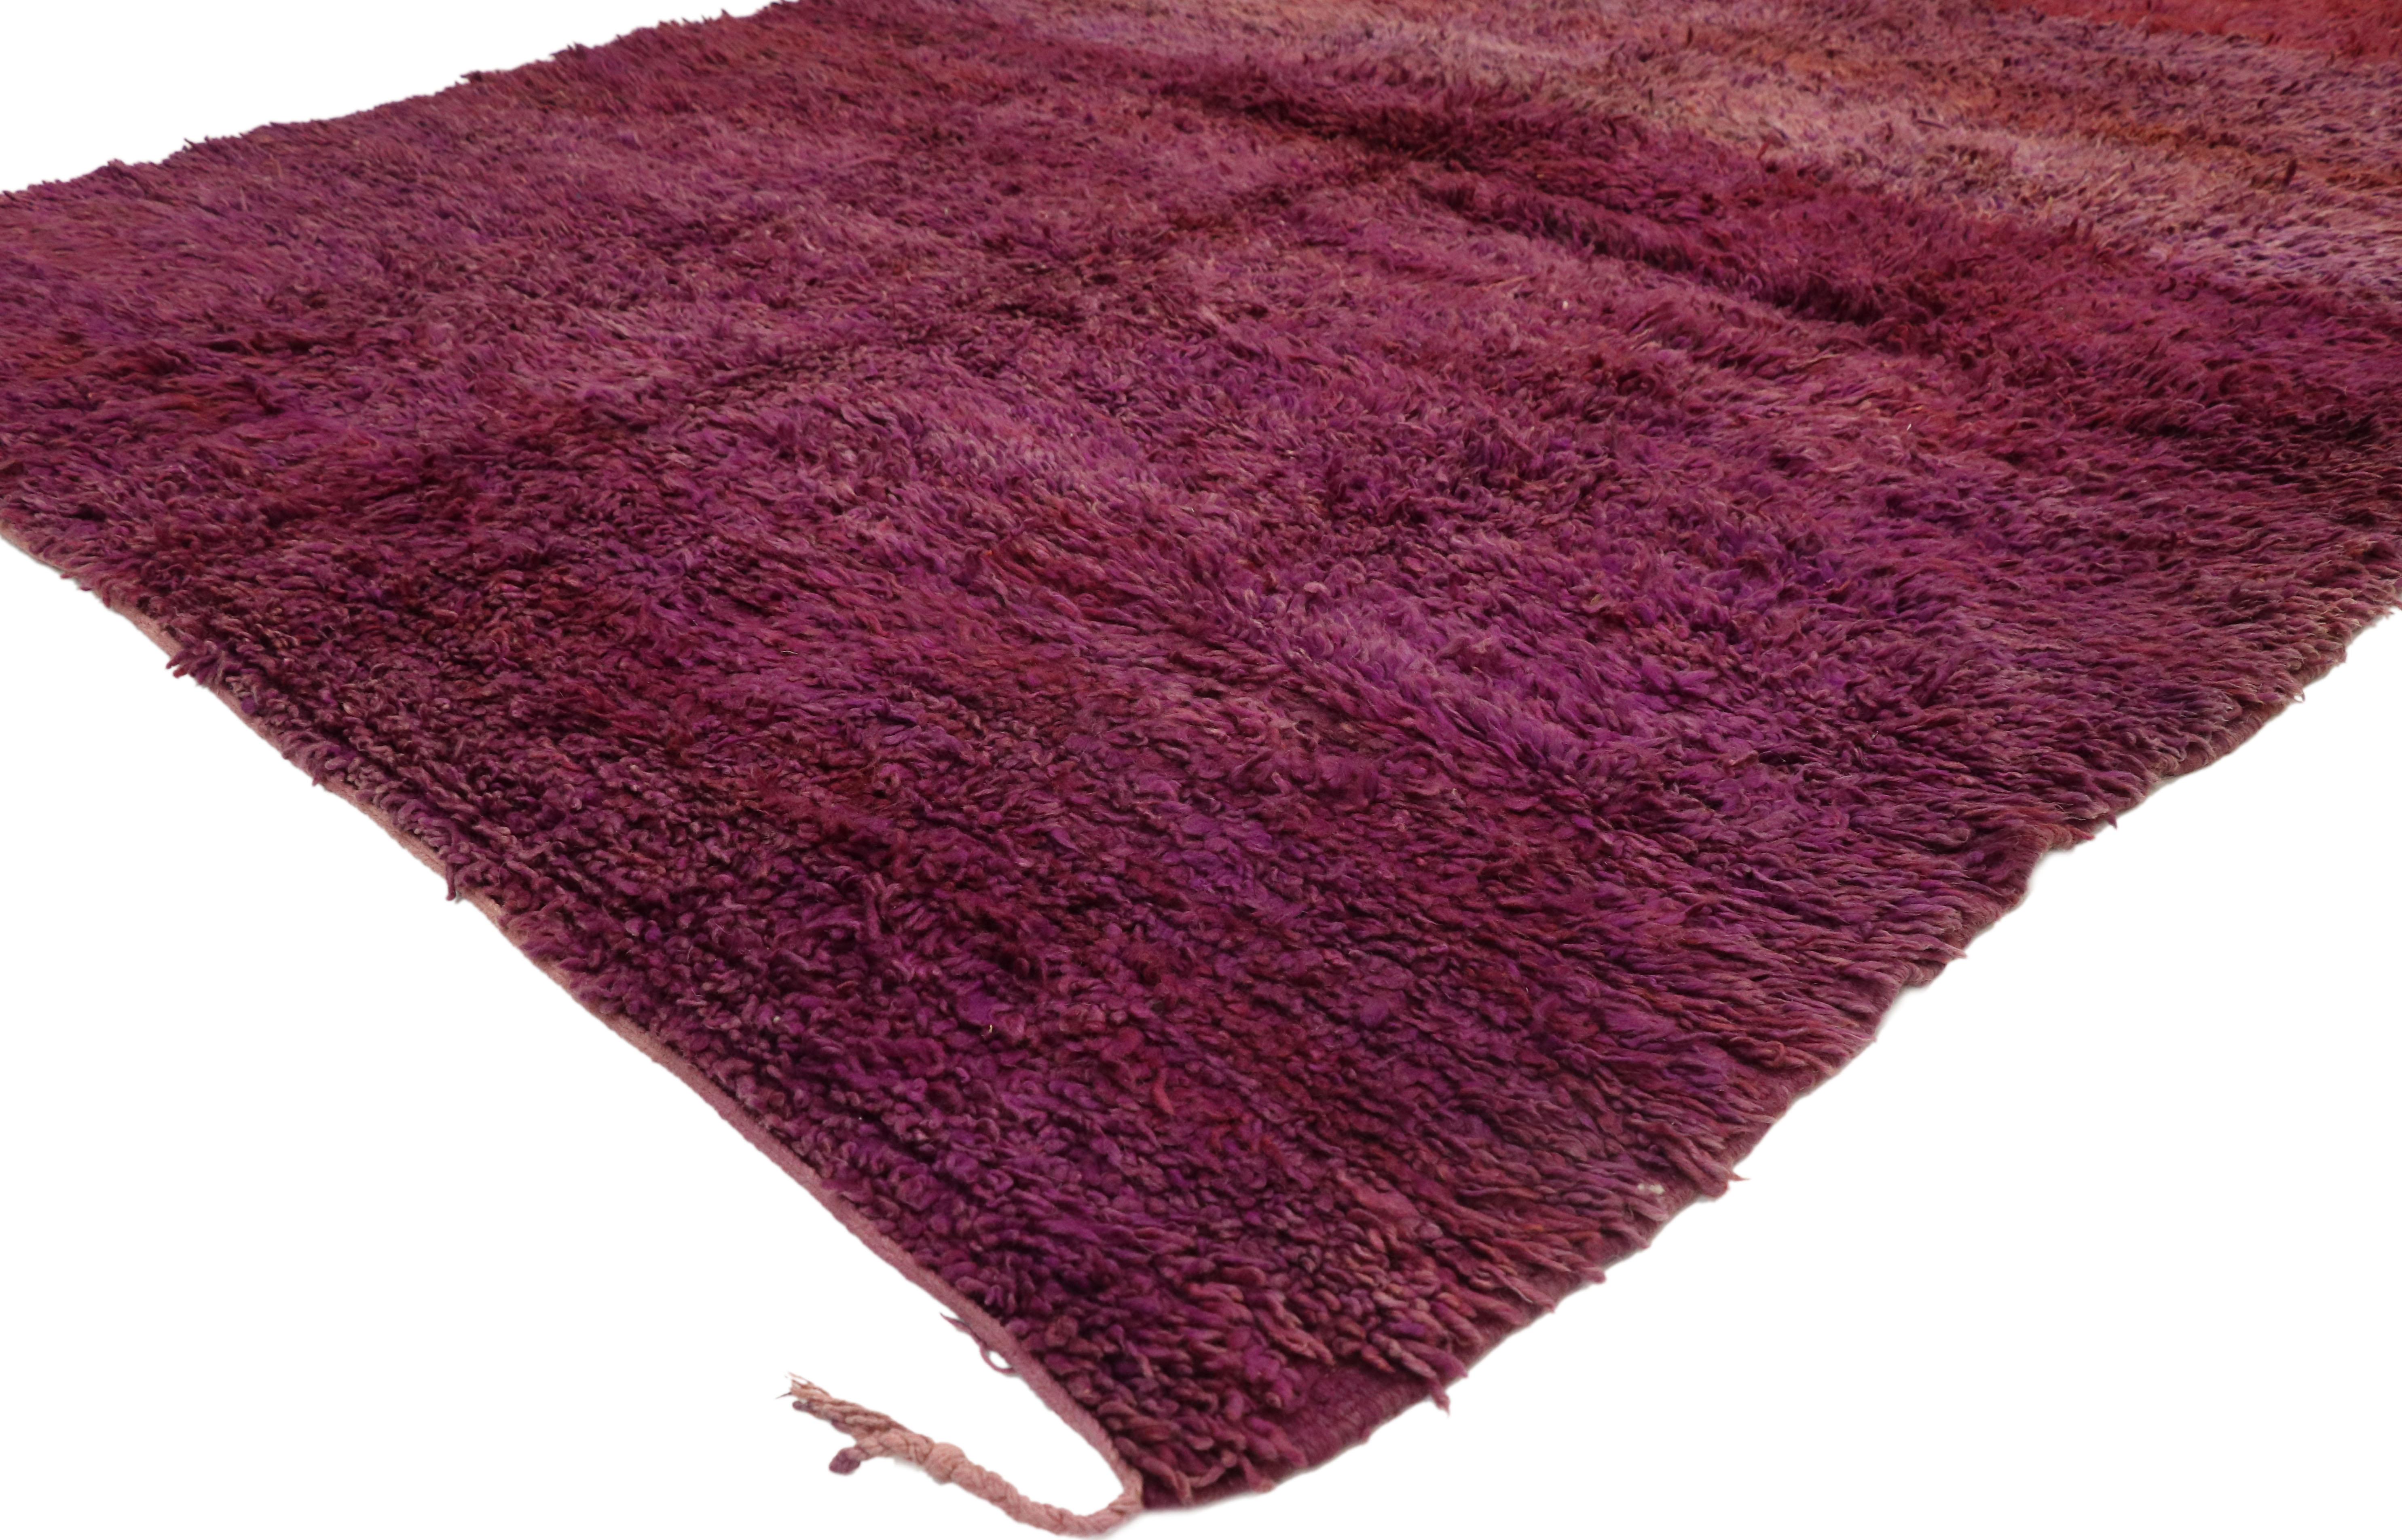 21064, vintage Berber Moroccan rug with Cozy Hygge Bohemian style. This hand knotted wool vintage Moroccan rug emanates function and versatility with cozy Bohemian vibes. Featuring raspberry, cranberry, burgundy, and magenta hues, the rich waves of